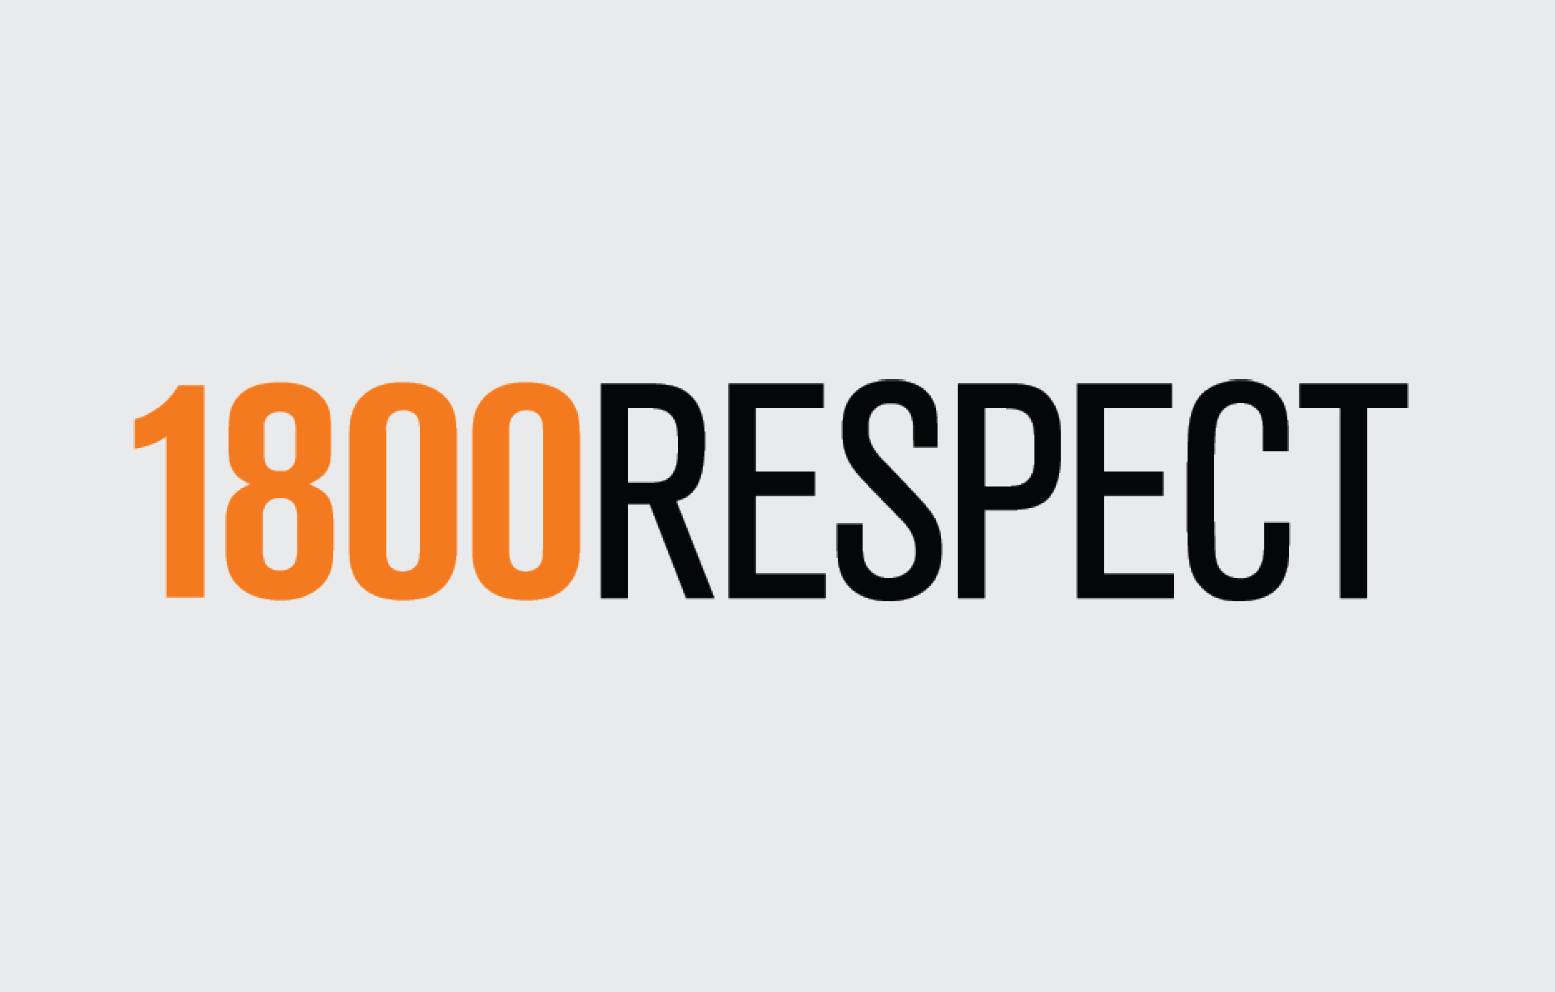 You can call 1800 Respect if coercive control happens to you or someone you know. 1800 Respect gives free support and information.